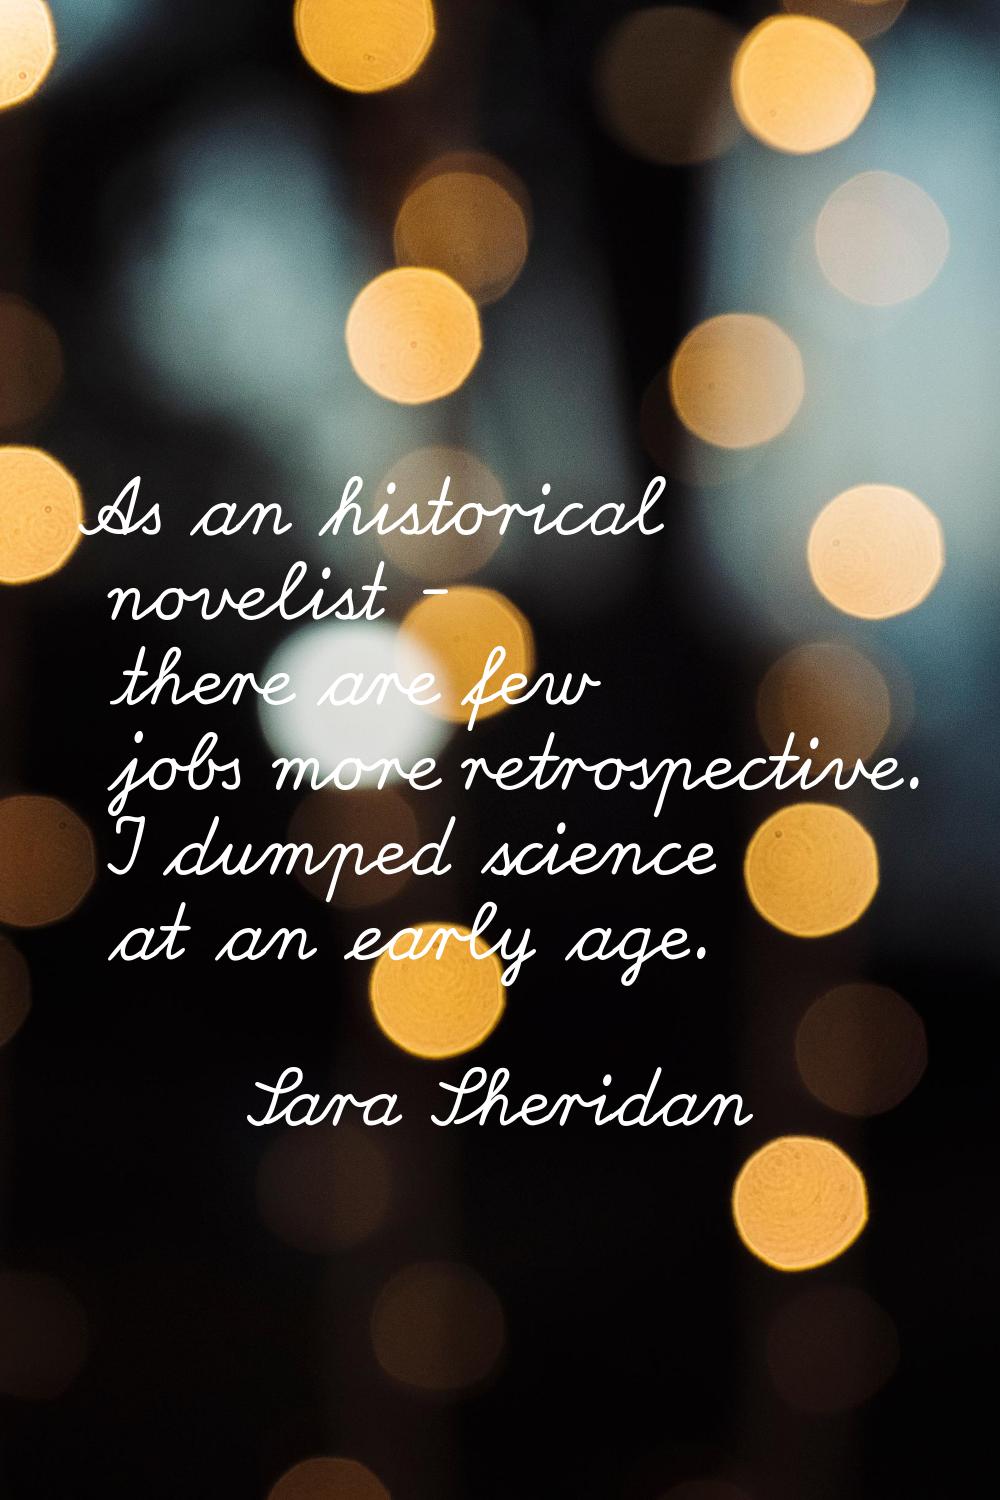 As an historical novelist - there are few jobs more retrospective. I dumped science at an early age